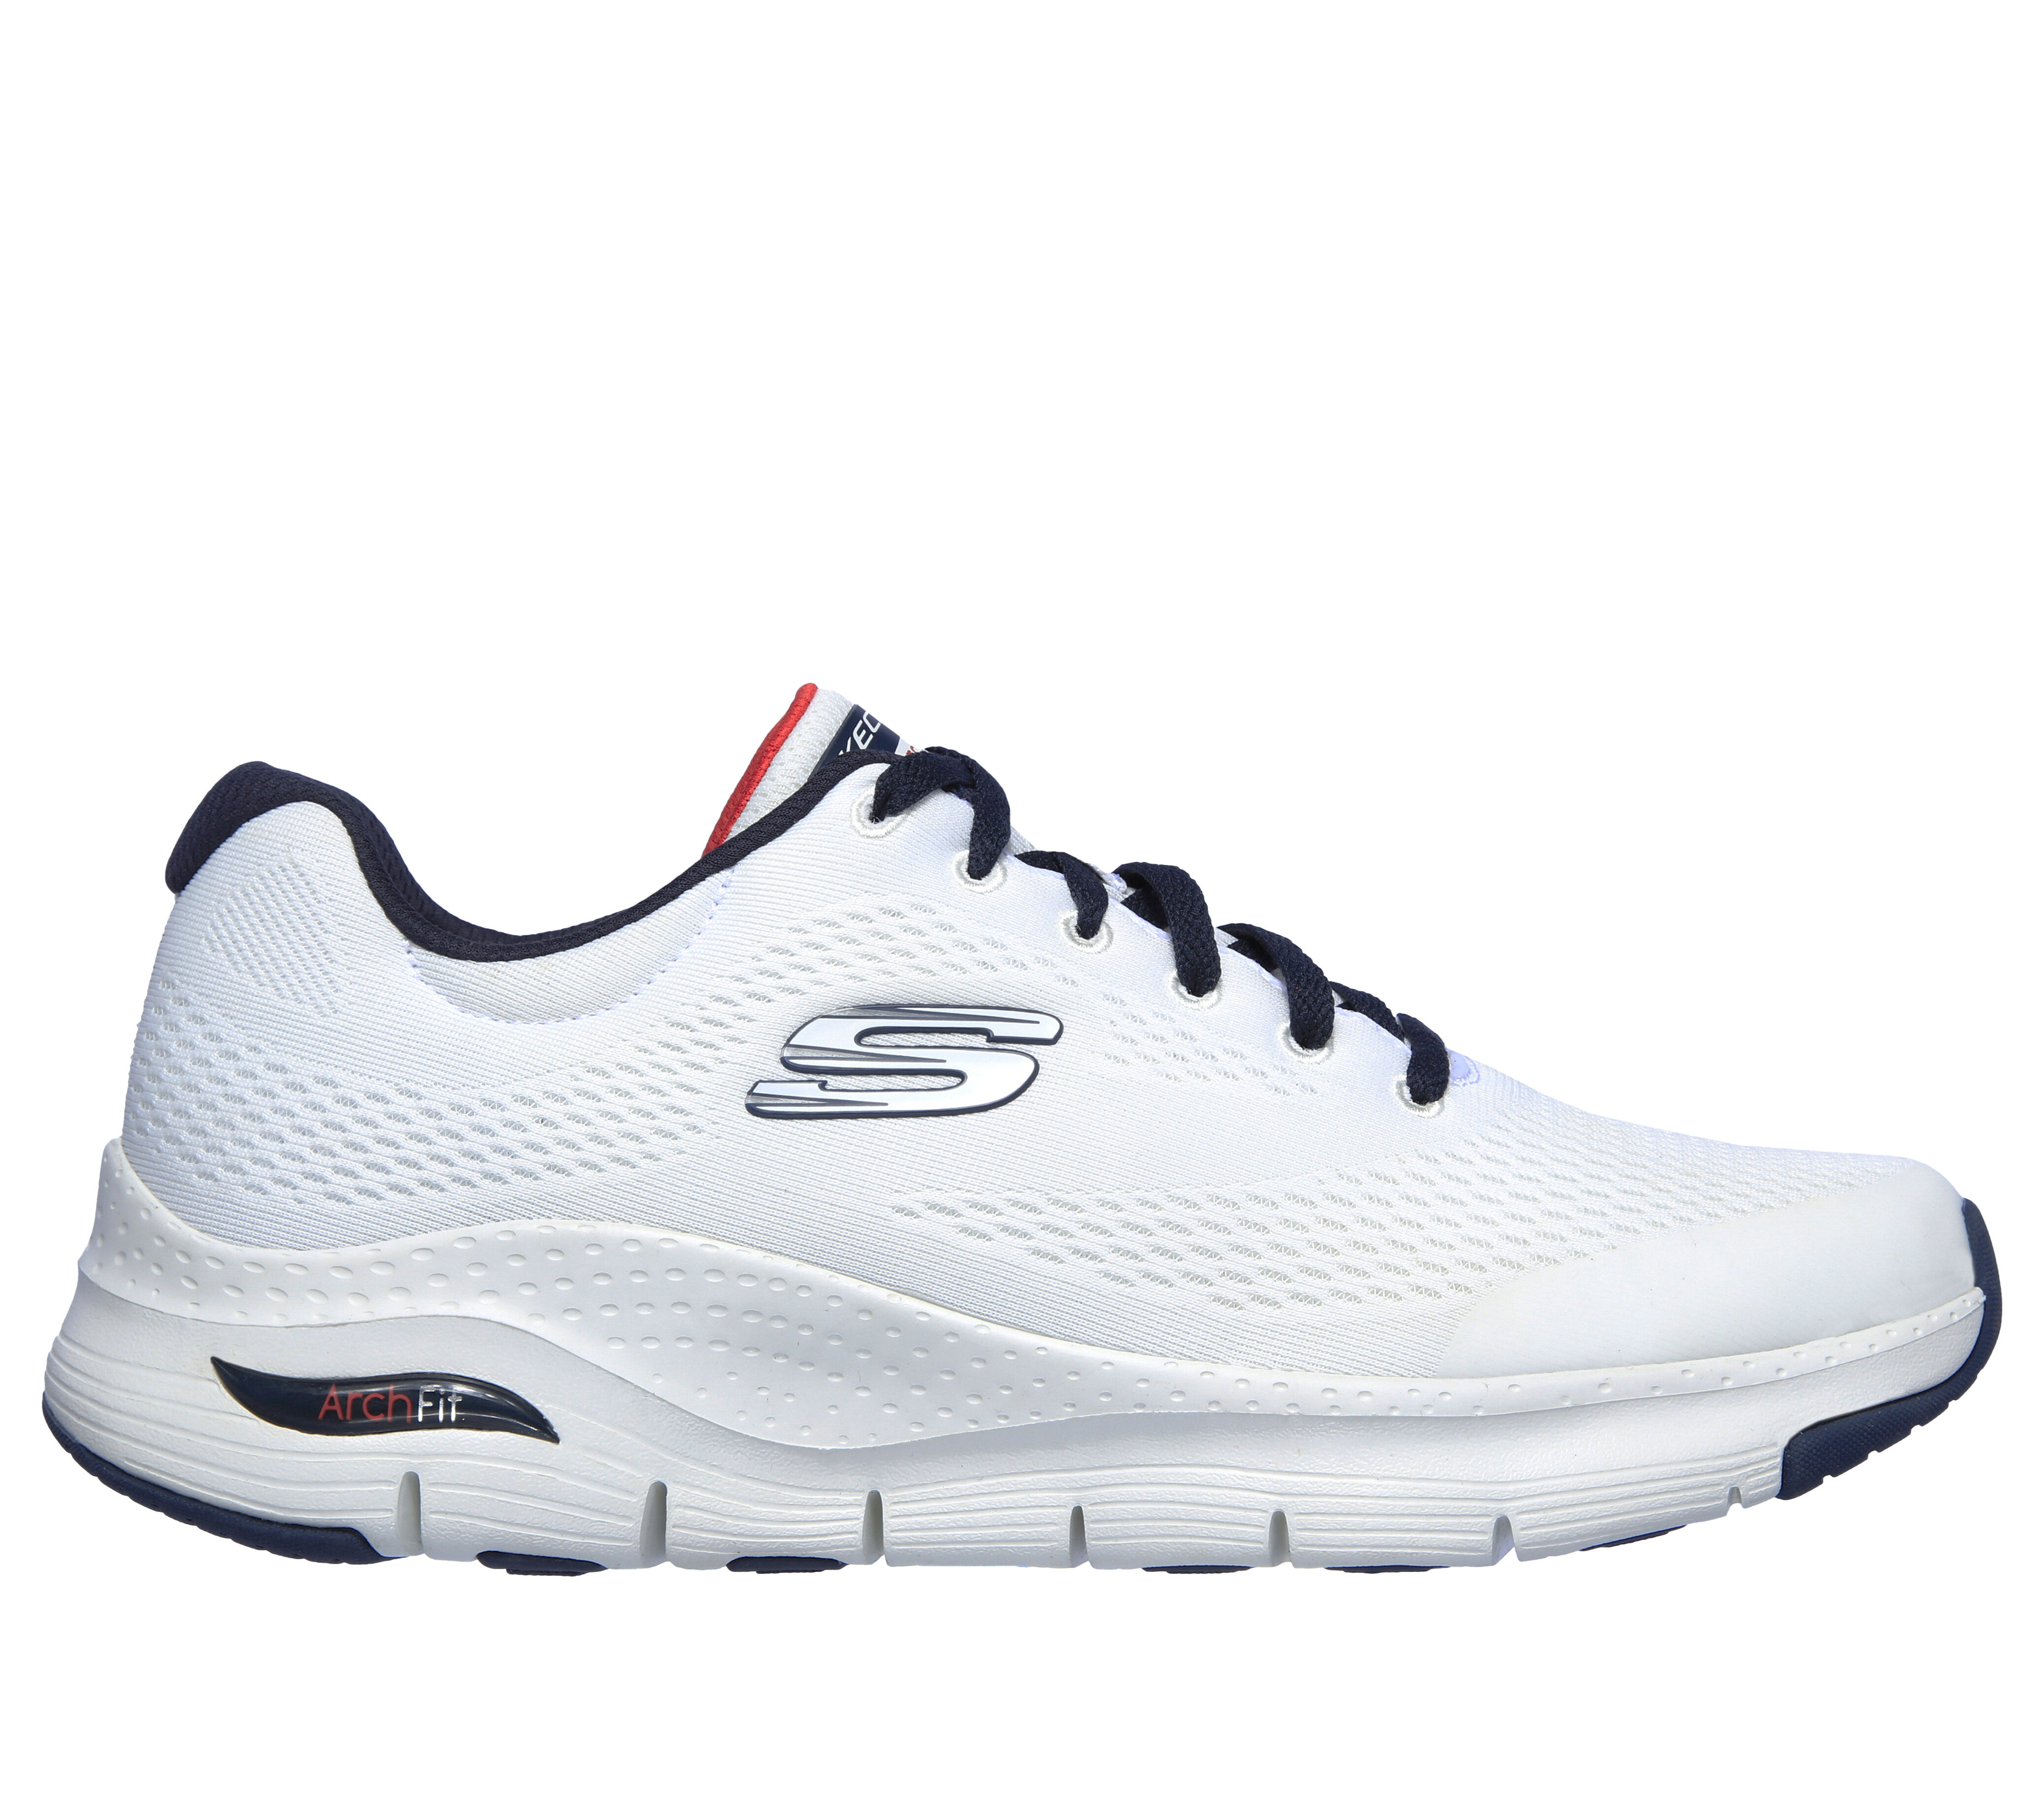 skechers shoes contact number